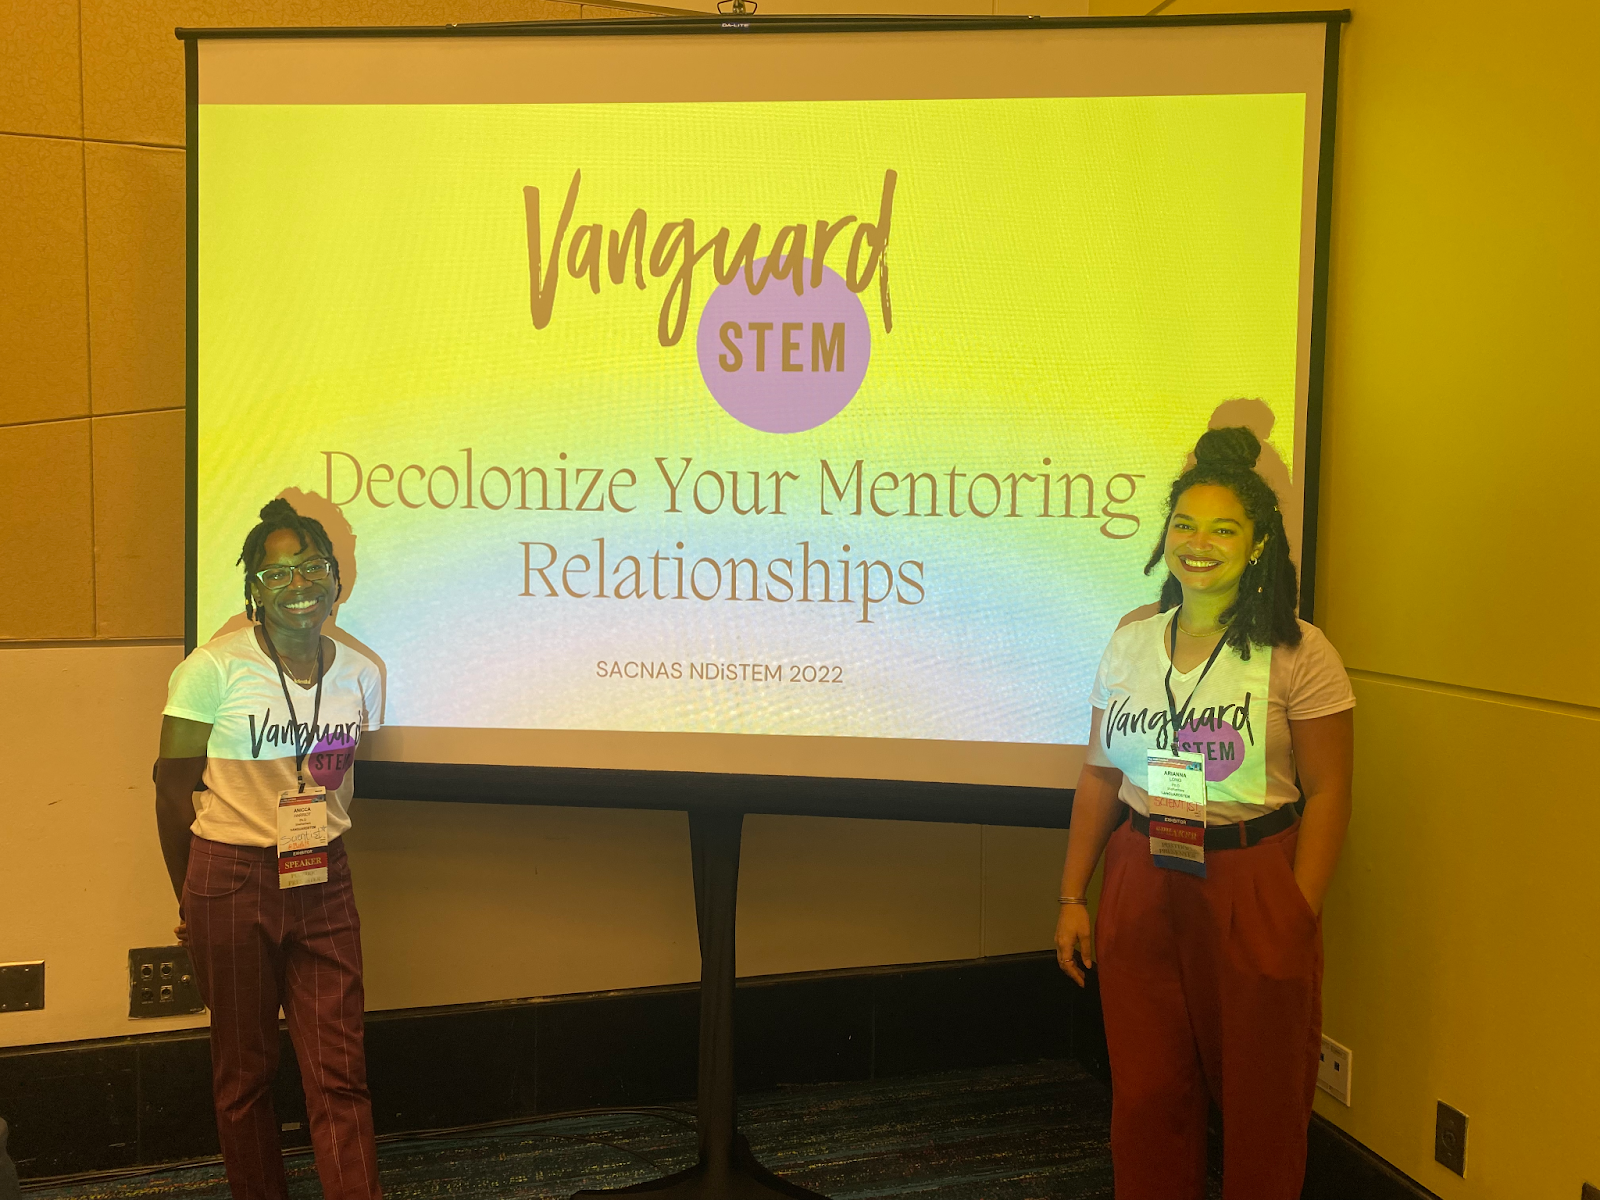 A photo of Dr. Long and Dr. Harriot standing in front of a projector screen showing a presentation titled "Decolonize your mentoring relationships"